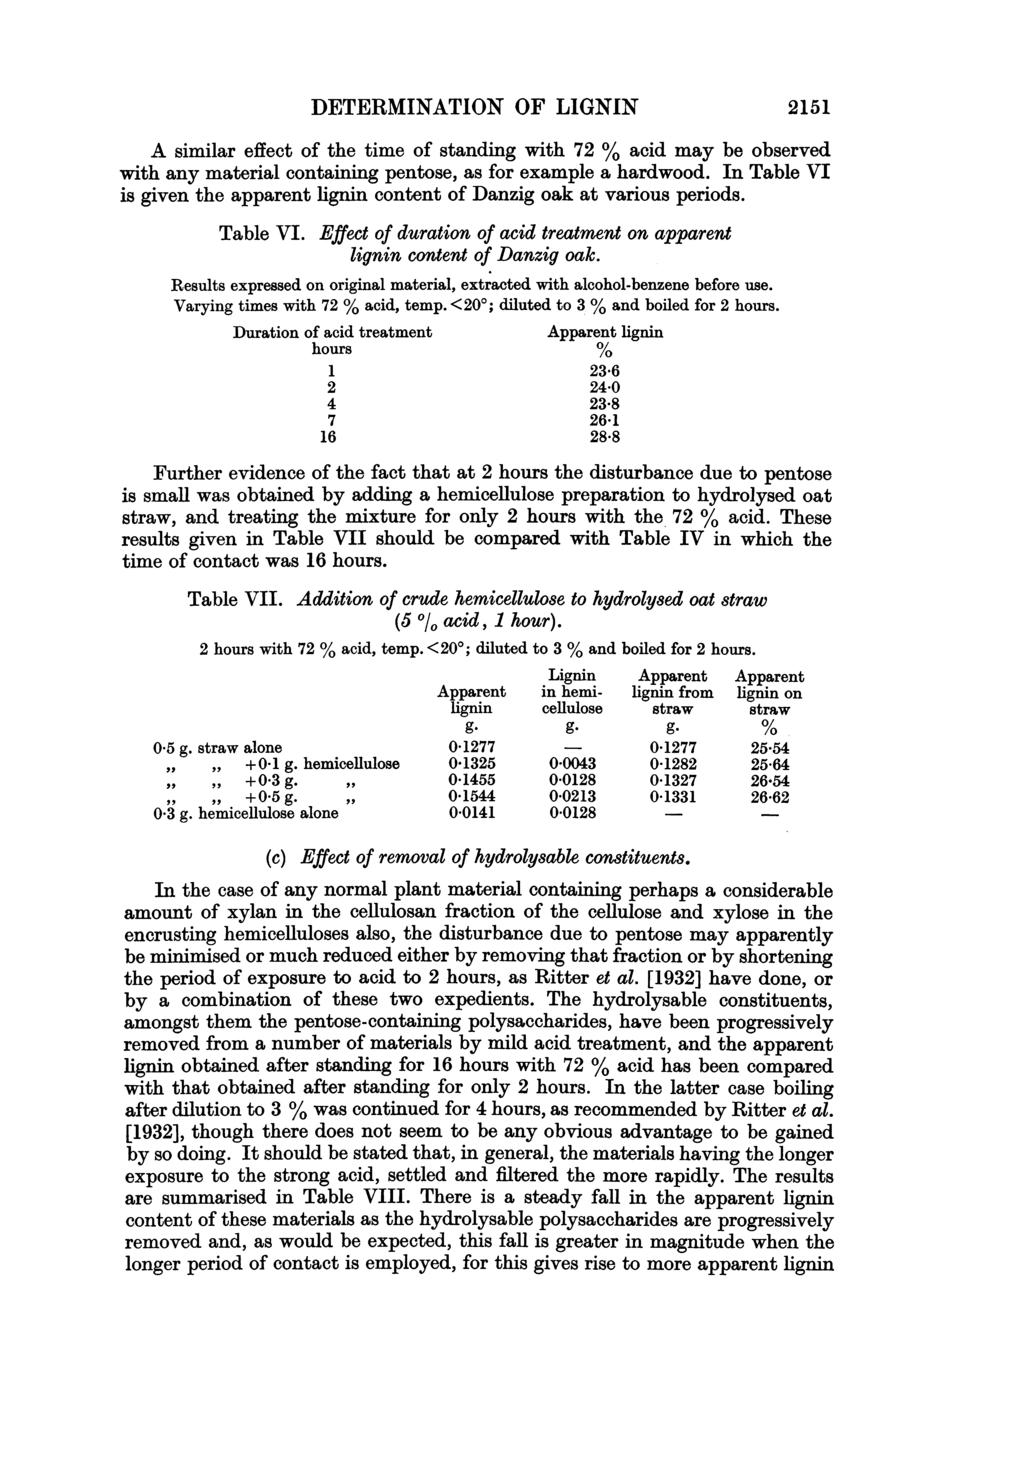 DETERMINATION OF LIGNIN 2151 A similar effect of the time of standing with 72 % acid may be observed with any material containing pentose, as for example a hardwood.